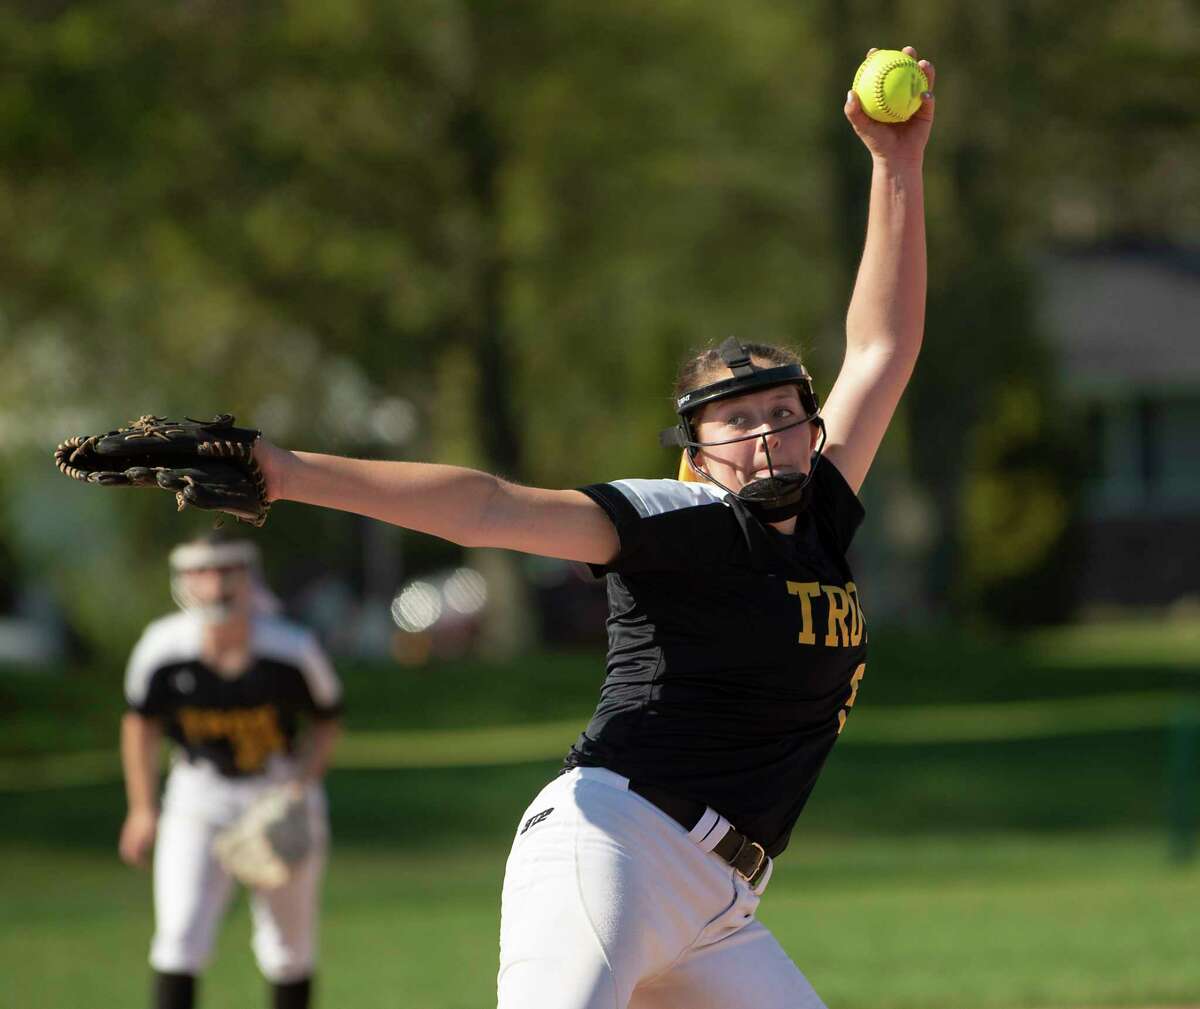 Troy's Olivia DeCitise throws a pitch during a softball game against Bethlehem earlier this season. She is 15-2 with a 1.21 earned-run average this season with 227 strikeouts.